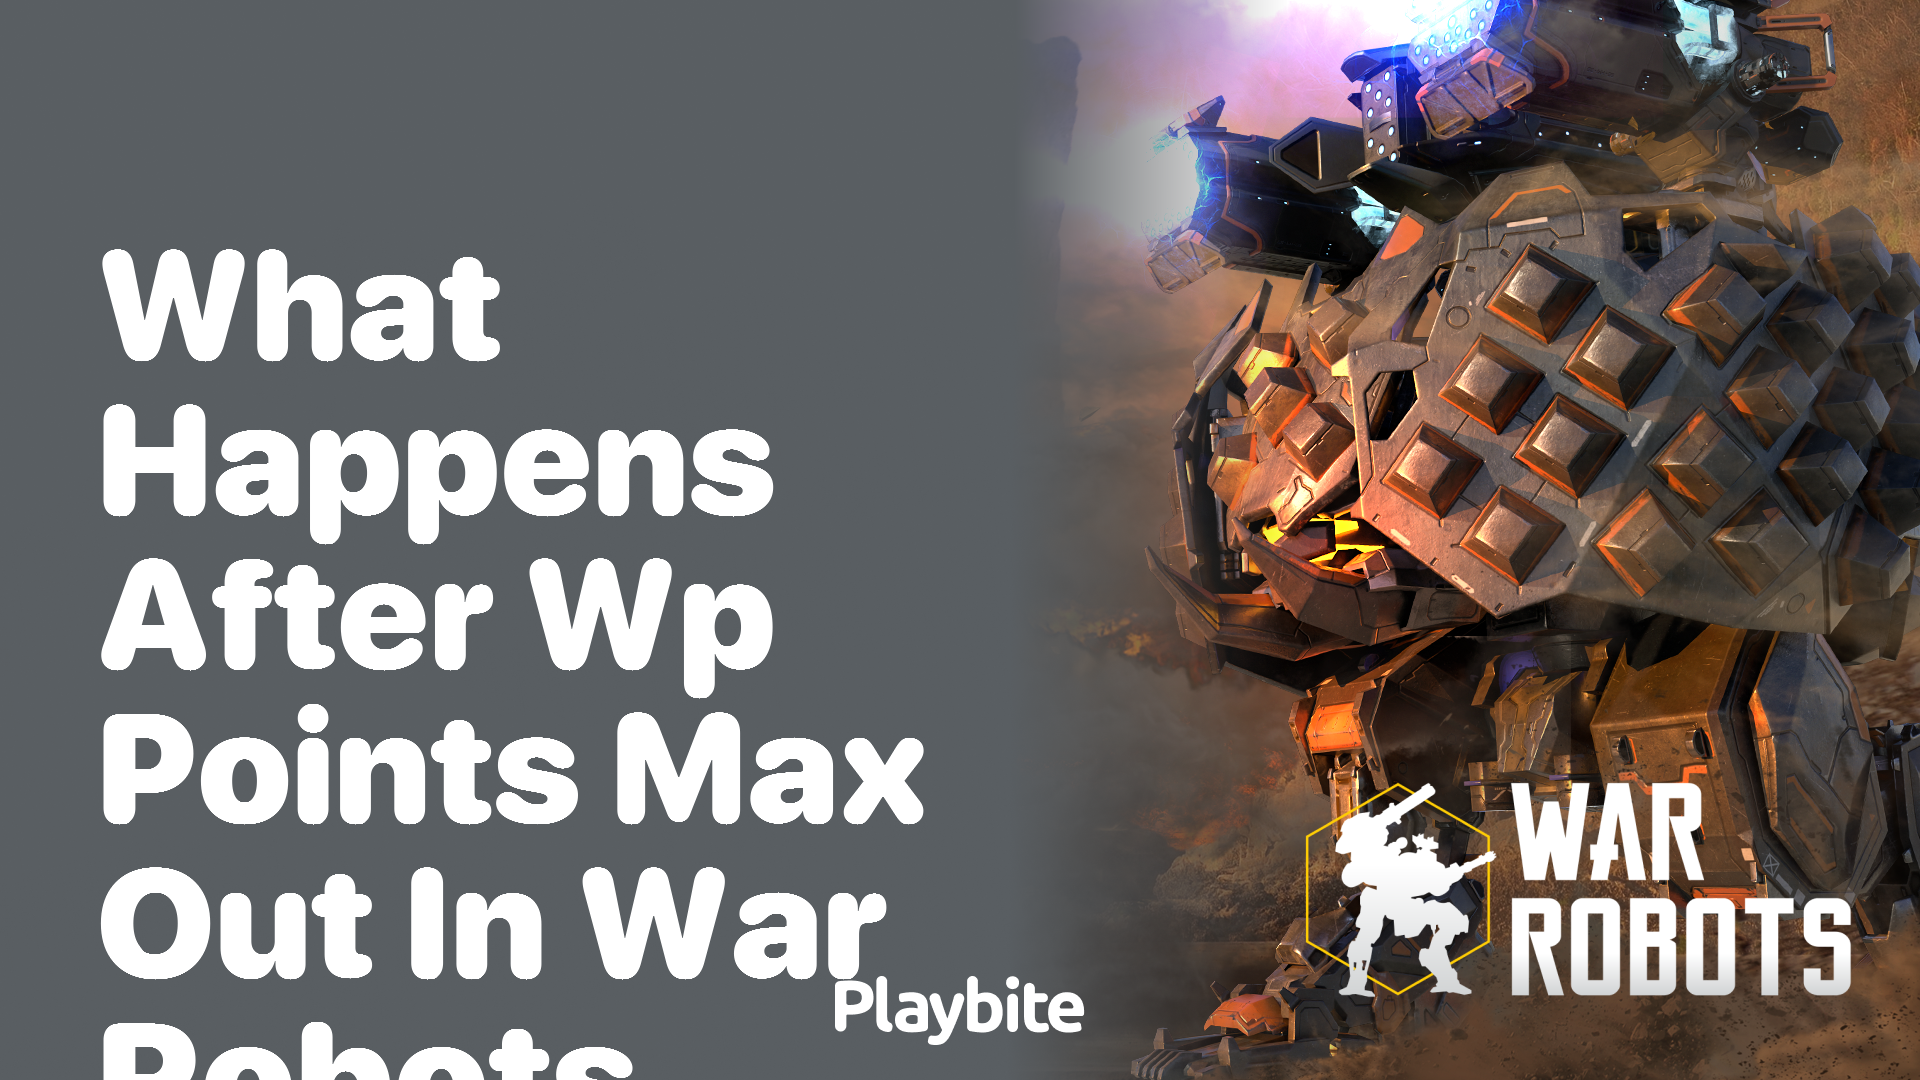 What Happens After WP Points Max Out in War Robots?